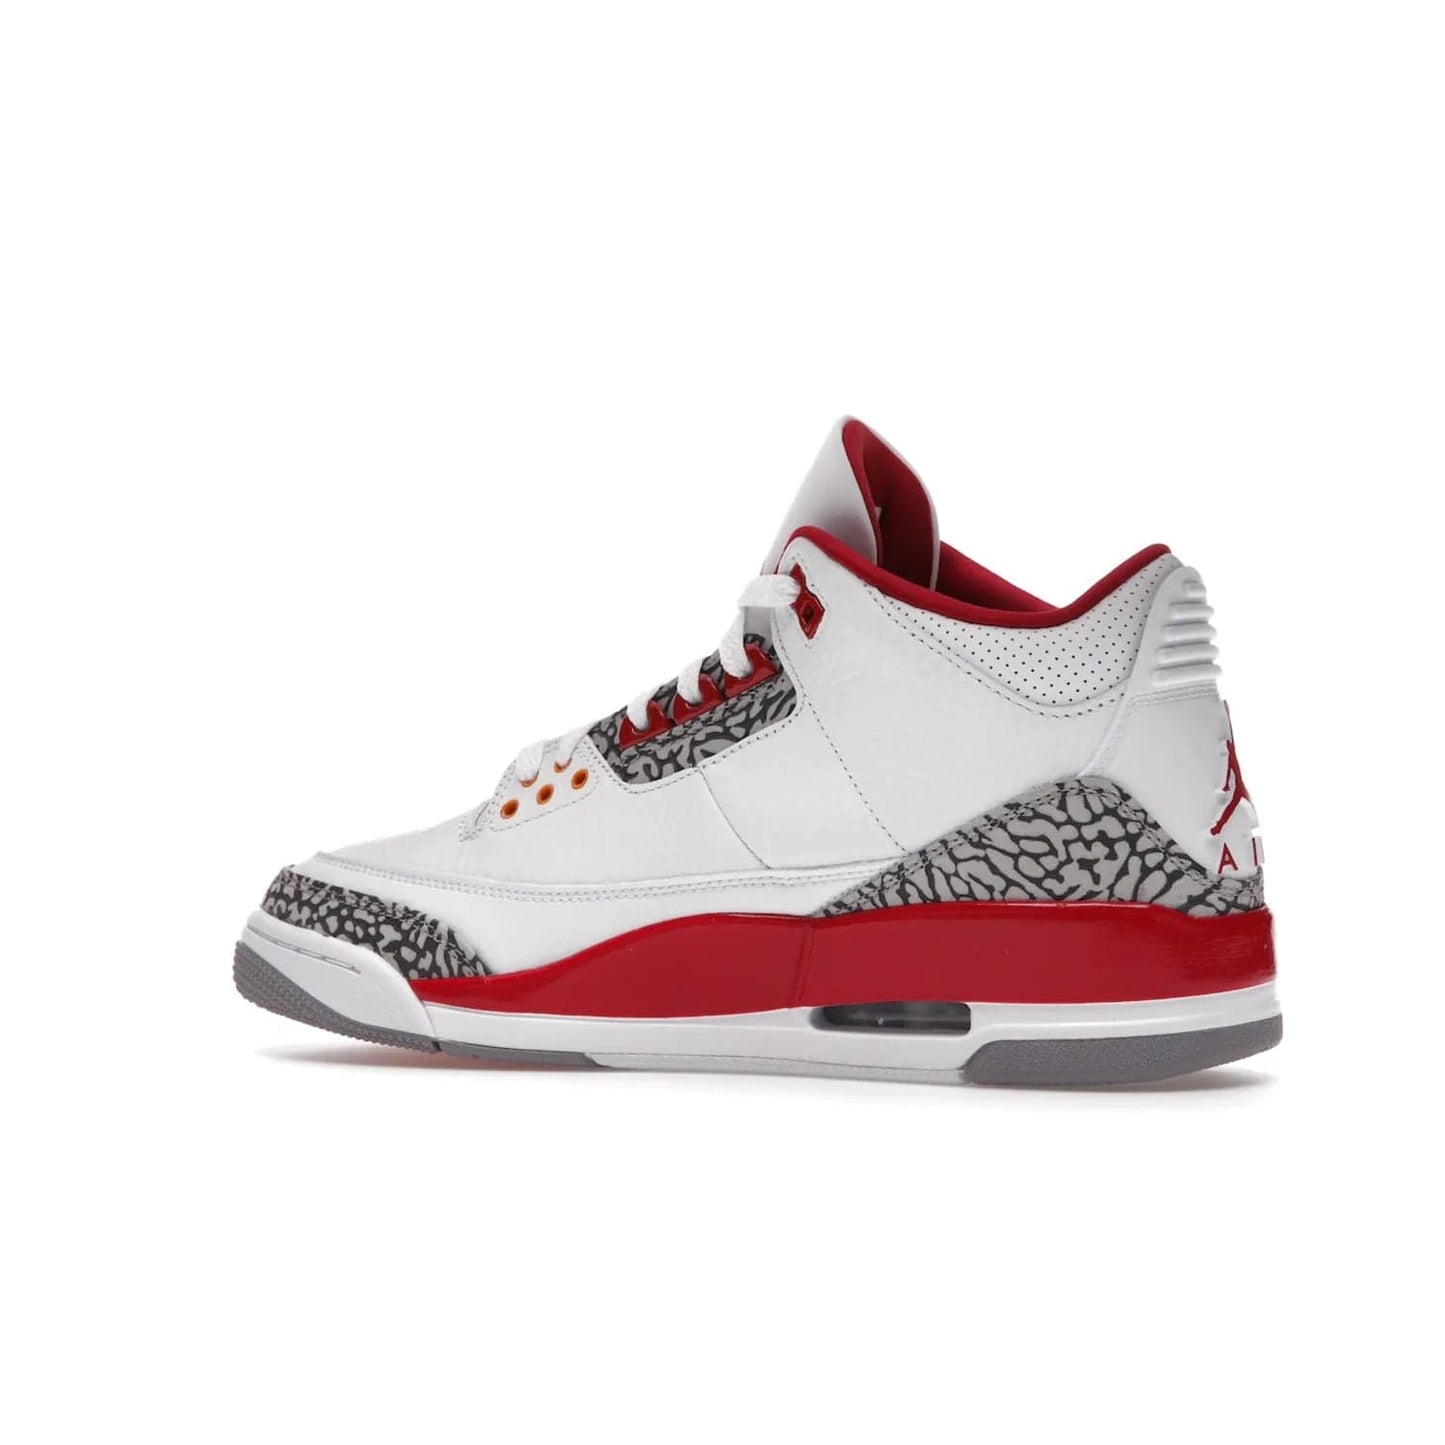 Jordan 3 Retro Cardinal Red - Image 22 - Only at www.BallersClubKickz.com - Air Jordan 3 Retro Cardinal Red combines classic style and modern appeal - white tumbled leather, signature Elephant Print overlays, cardinal red midsoles, Jumpman logo embroidery. Available Feb 2022.